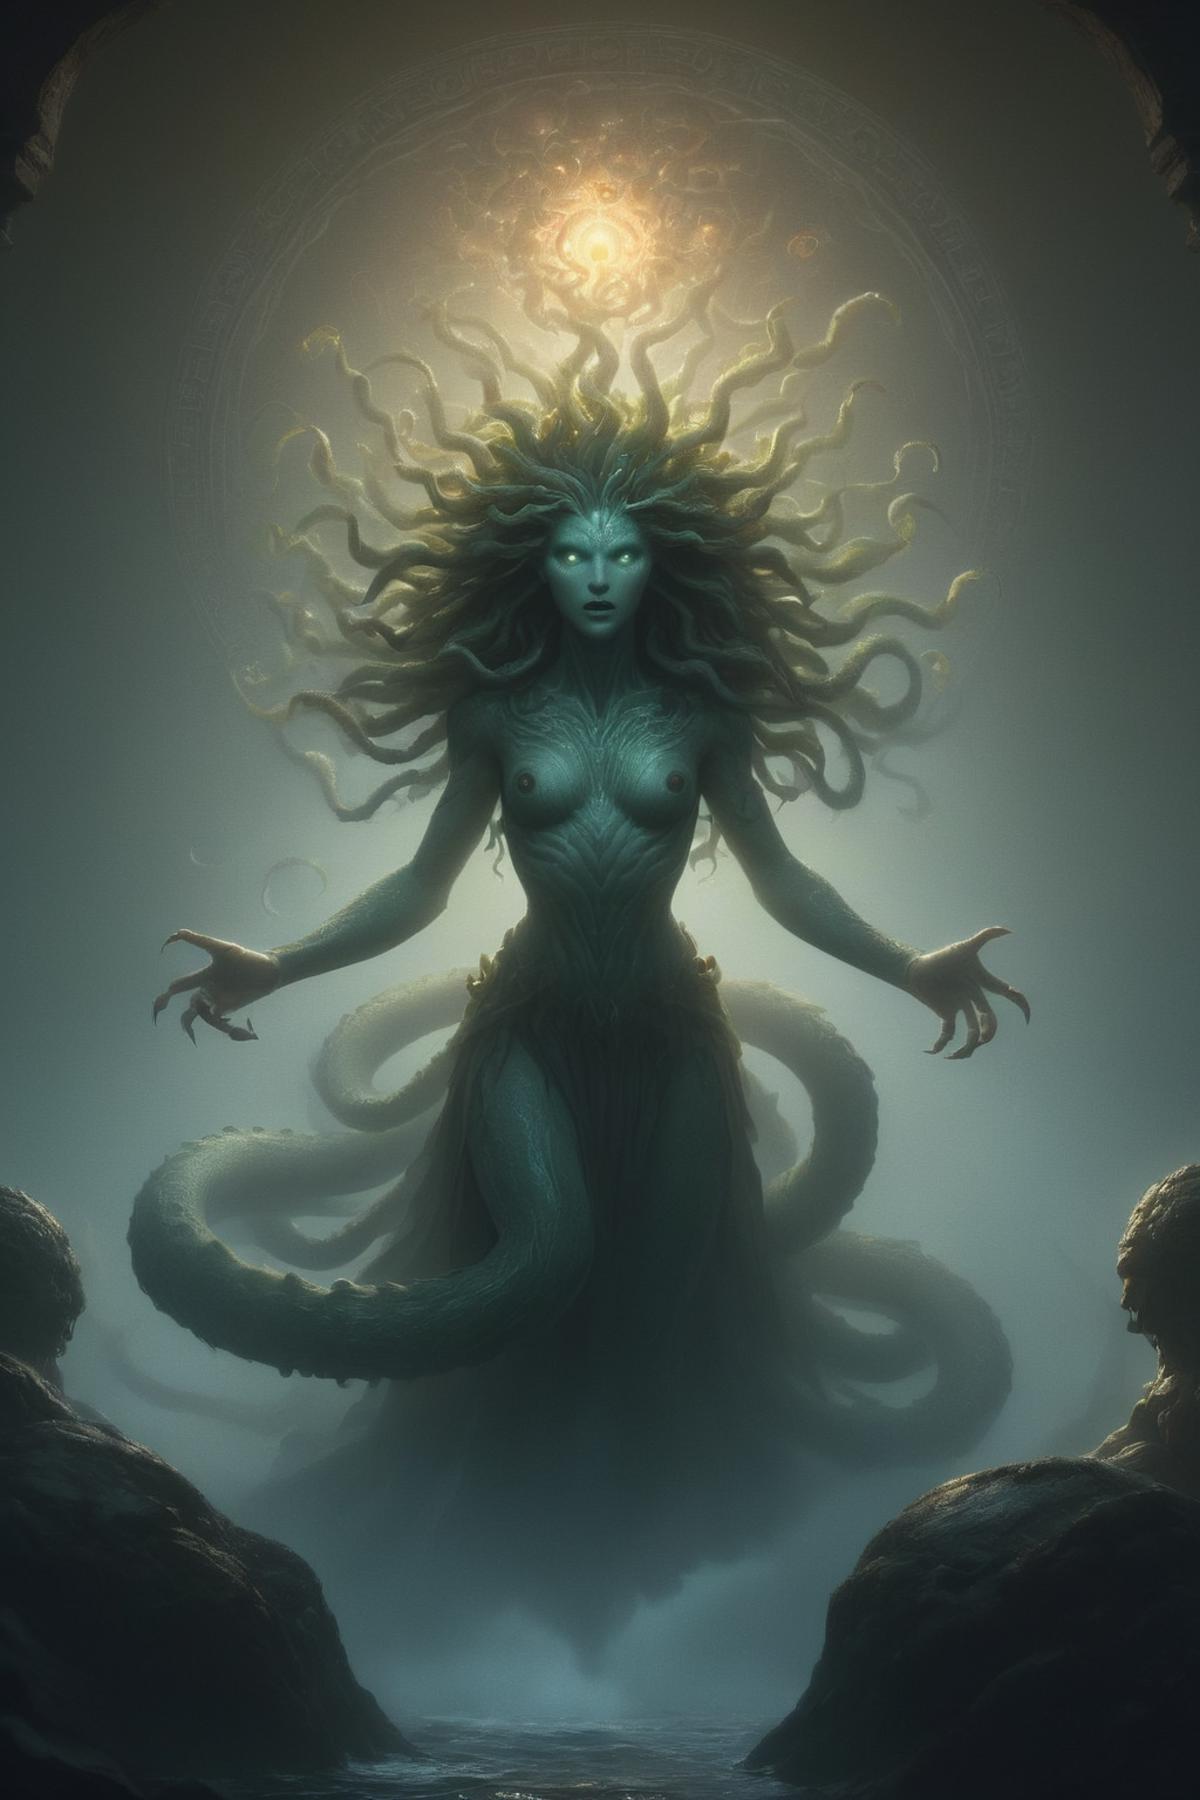 Ancient Greek Mythological Artwork Featuring a Mermaid-like Creature with Large Scales and Tentacles